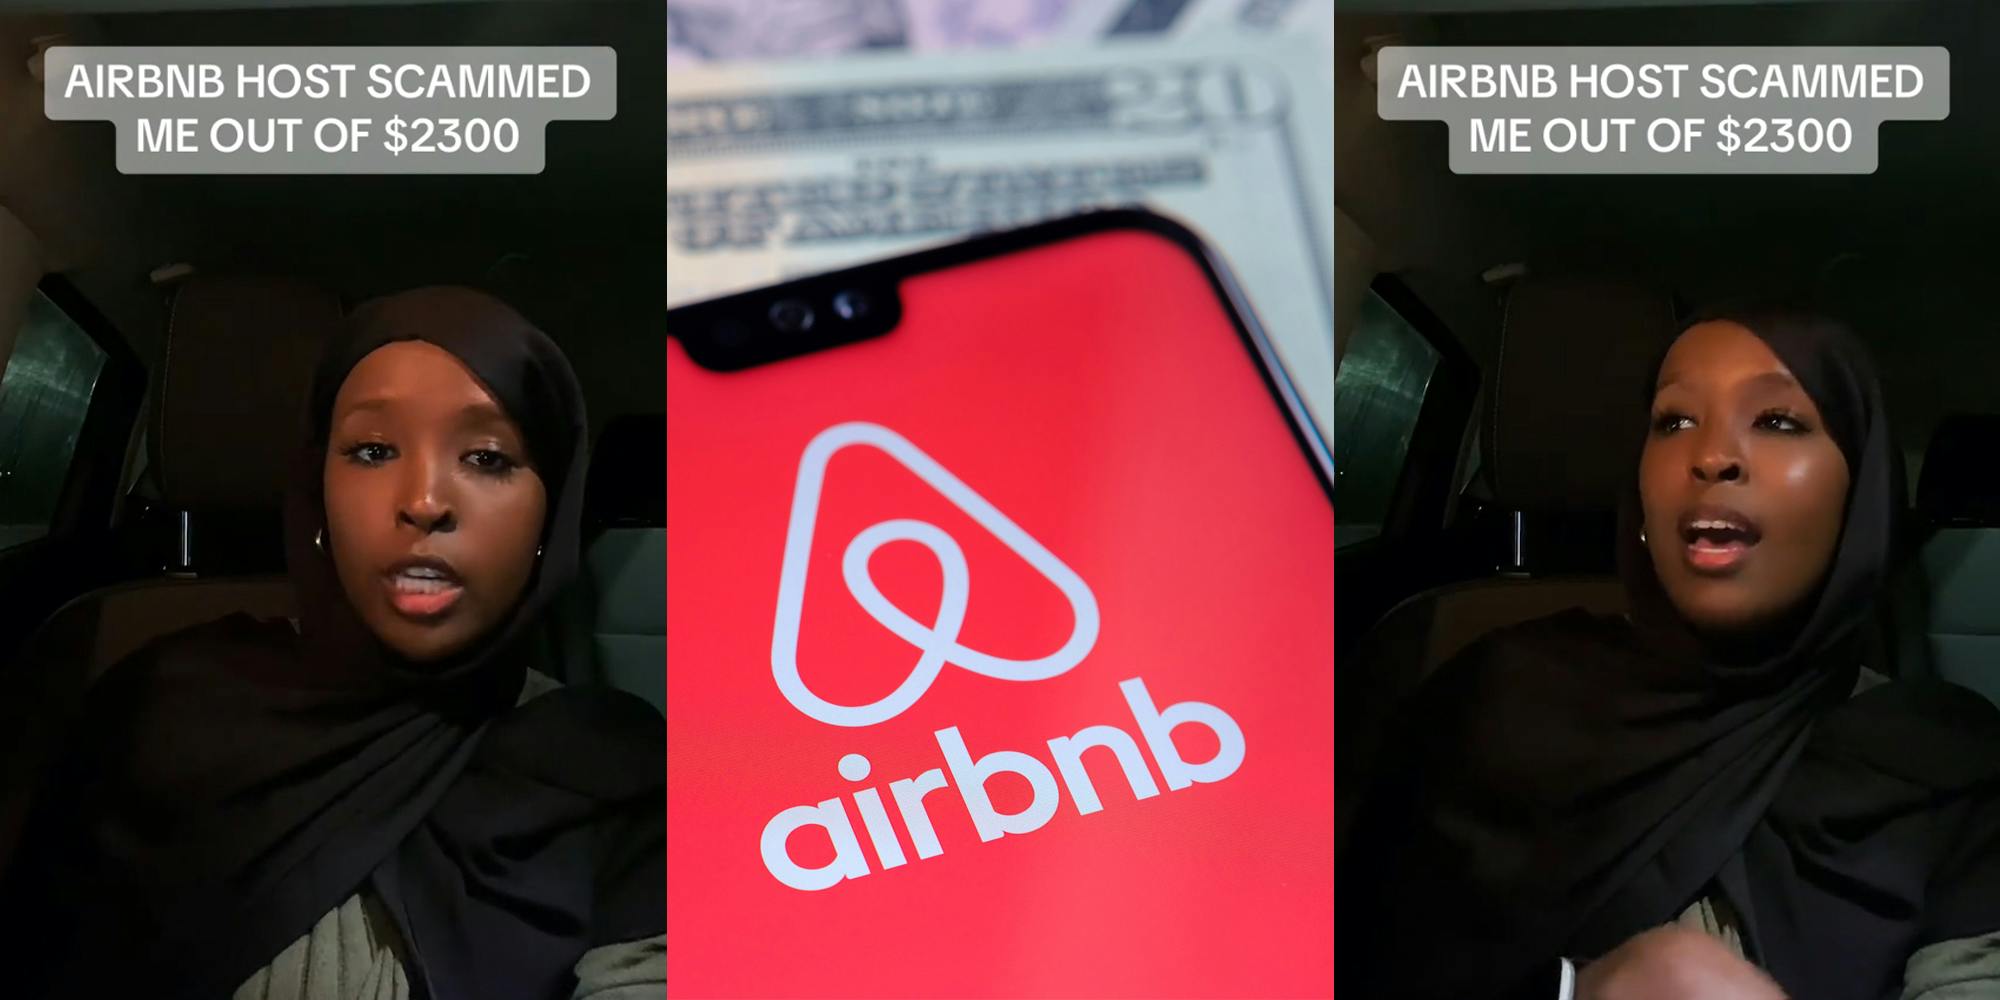 woman speaking in car with caption "AIRBNB HOST SCAMMED ME OUT OF $2300" (l) Airbnb pen on phone screen over cash (c) woman speaking in car with caption "AIRBNB HOST SCAMMED ME OUT OF $2300" (r)